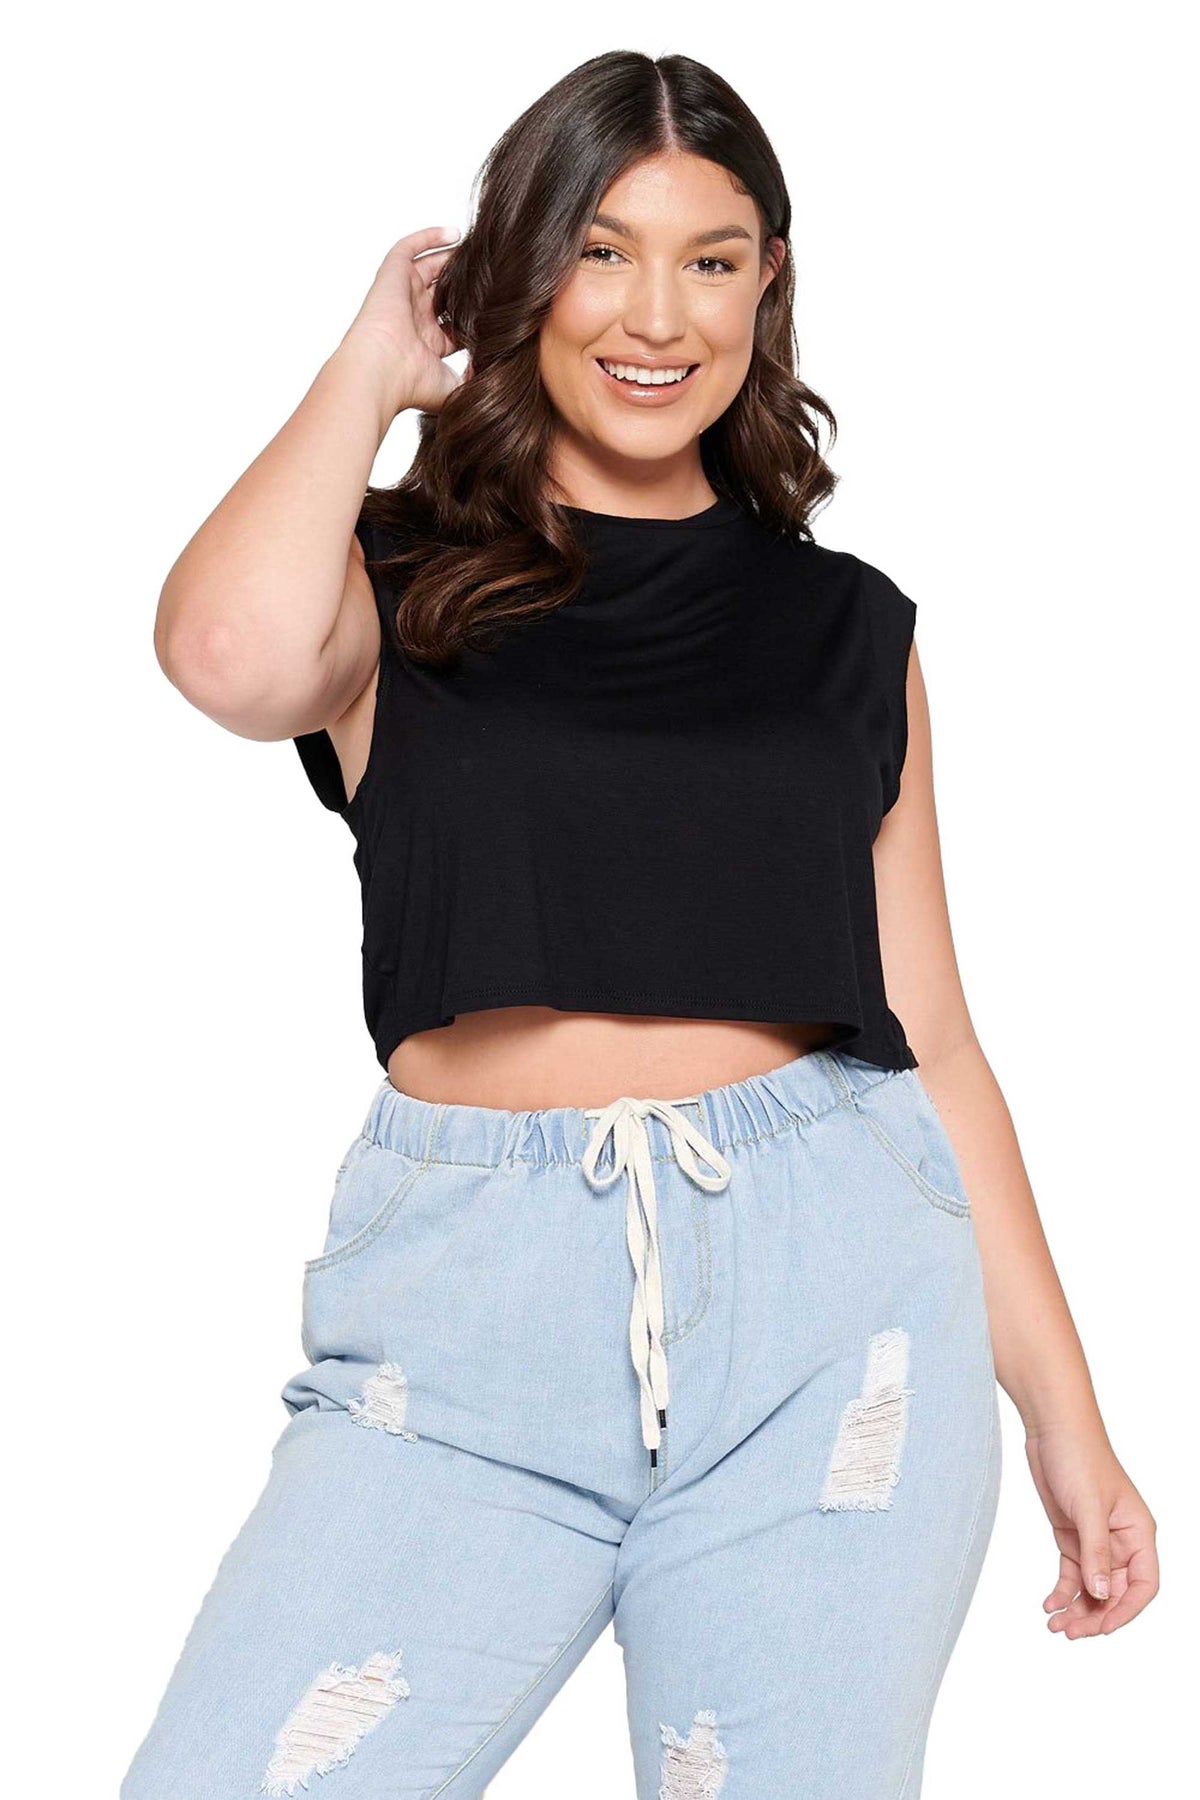 LIVD Apparel chic trendy plus size clothing black loose fitting crop top with mini cap sleeves